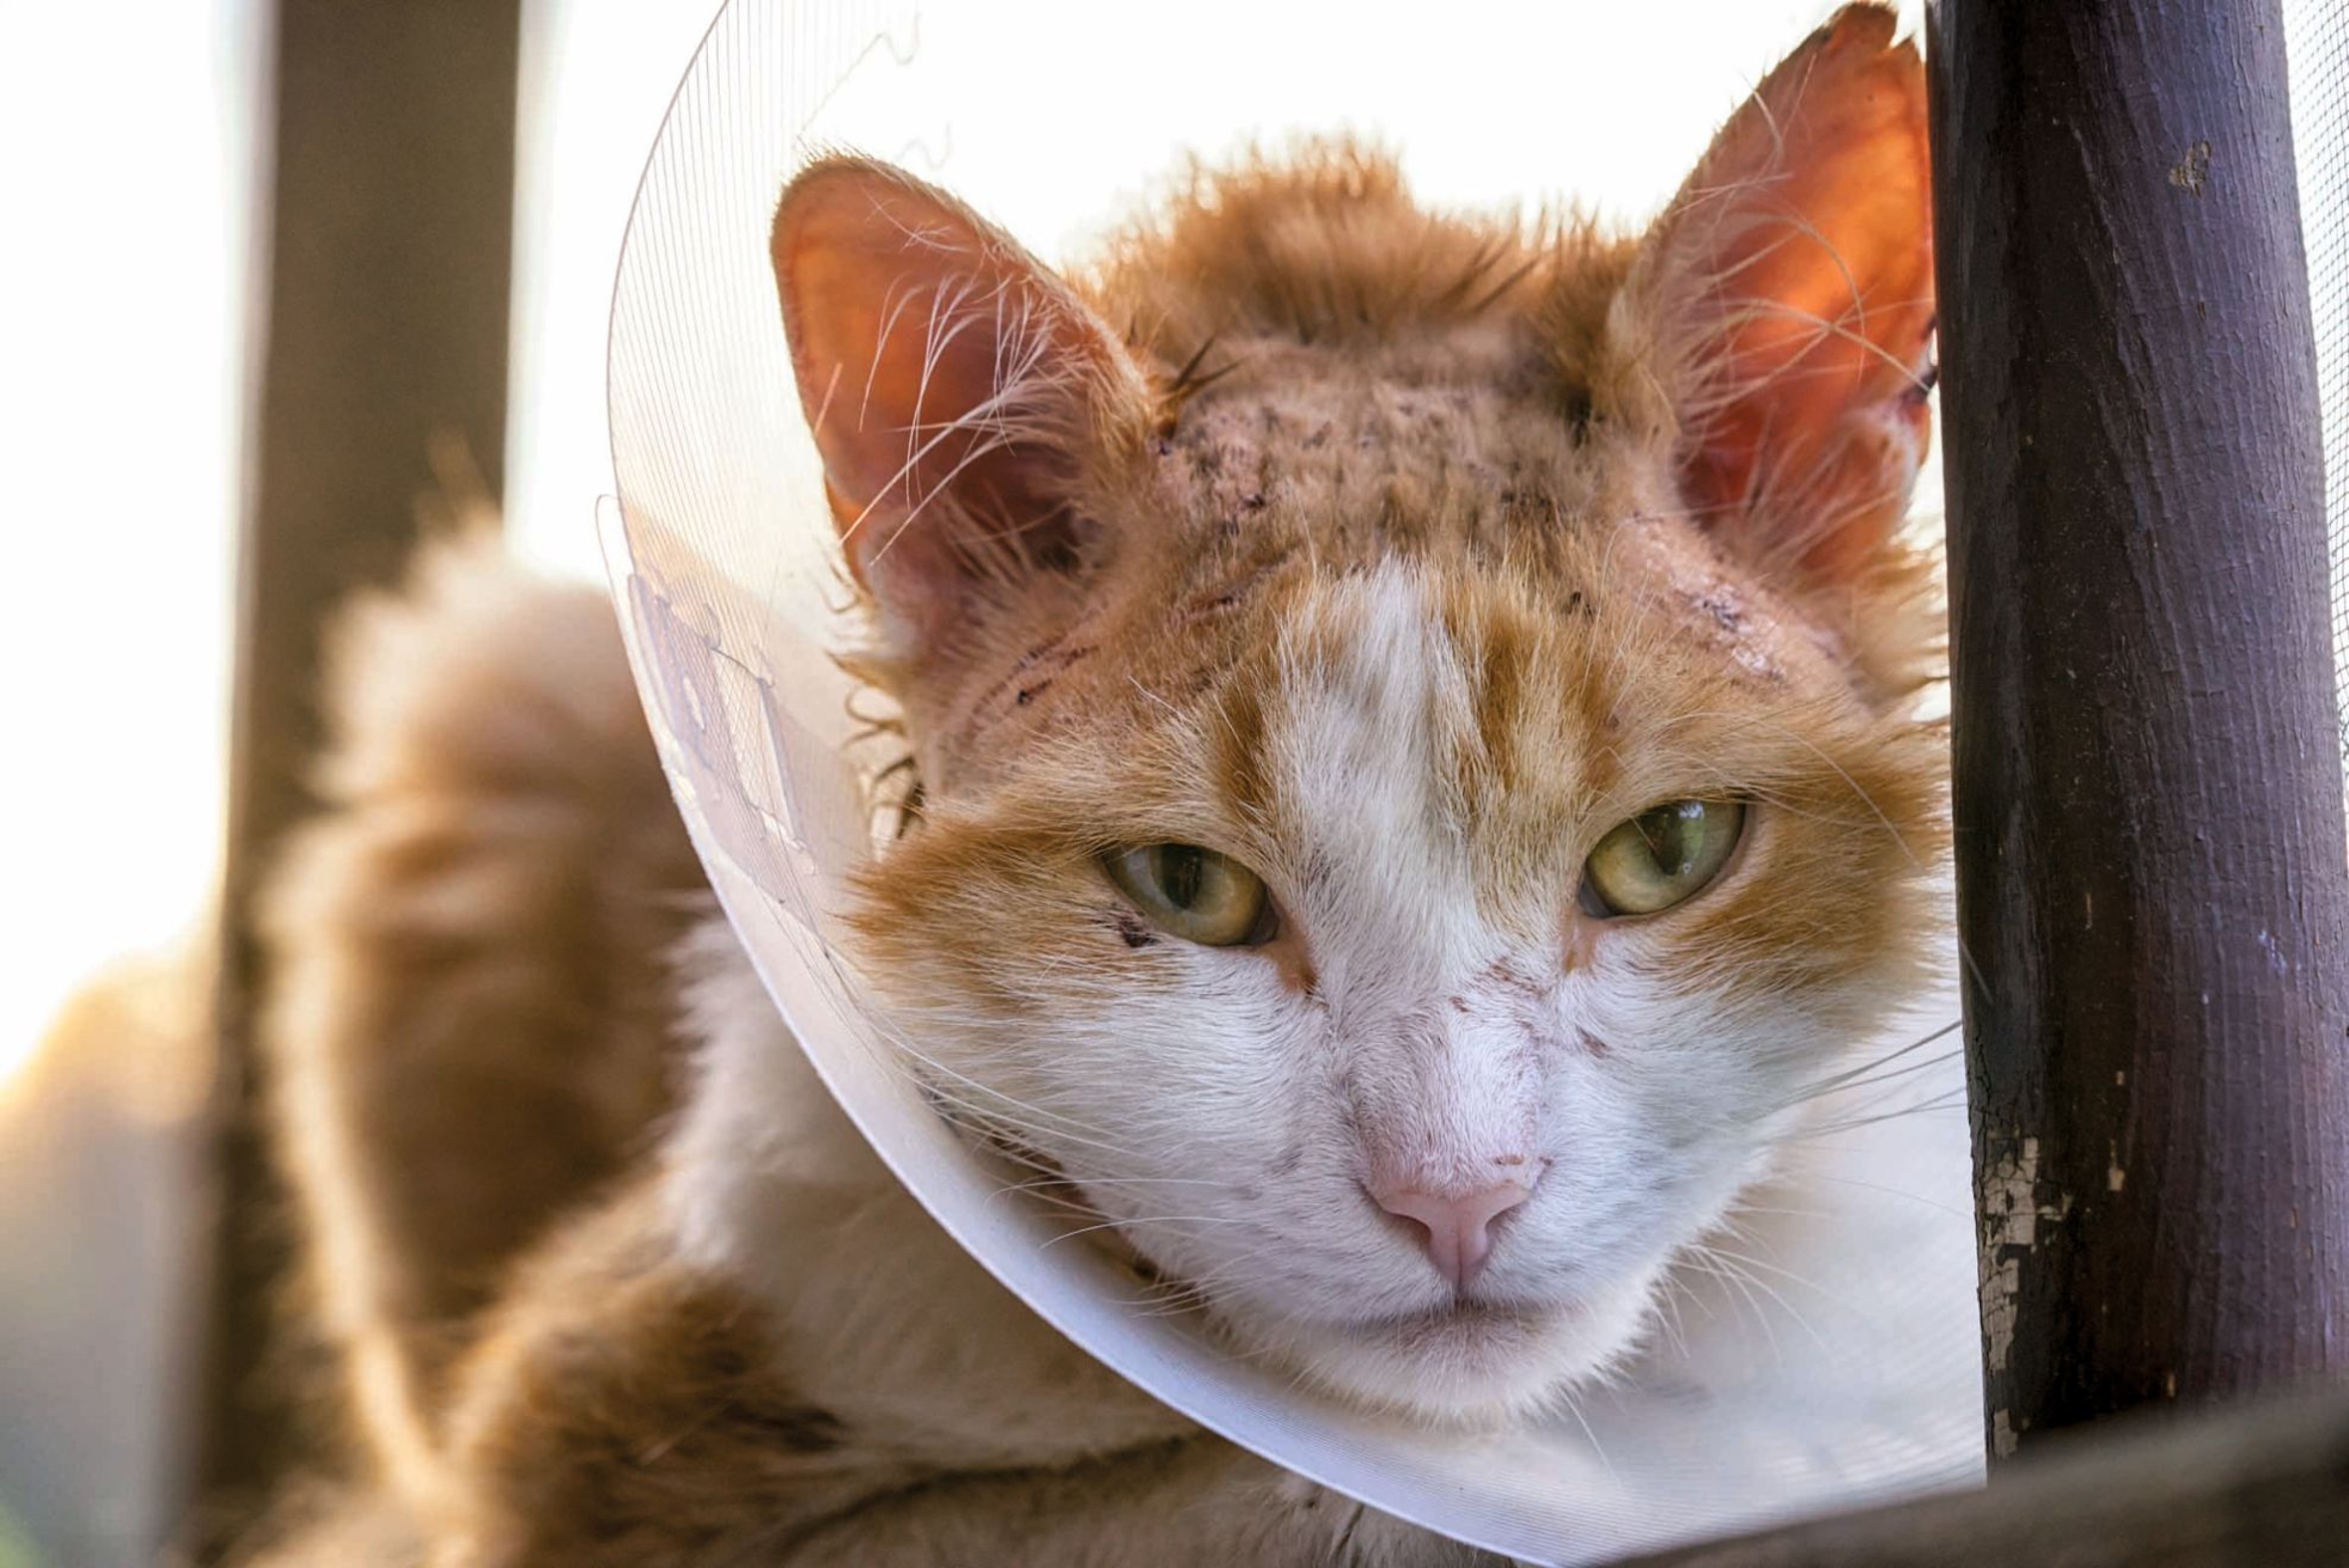 An Elizabethan collar may be useful to prevent a cat from inflicting self-trauma due to pruritus resulting from a skin problem.